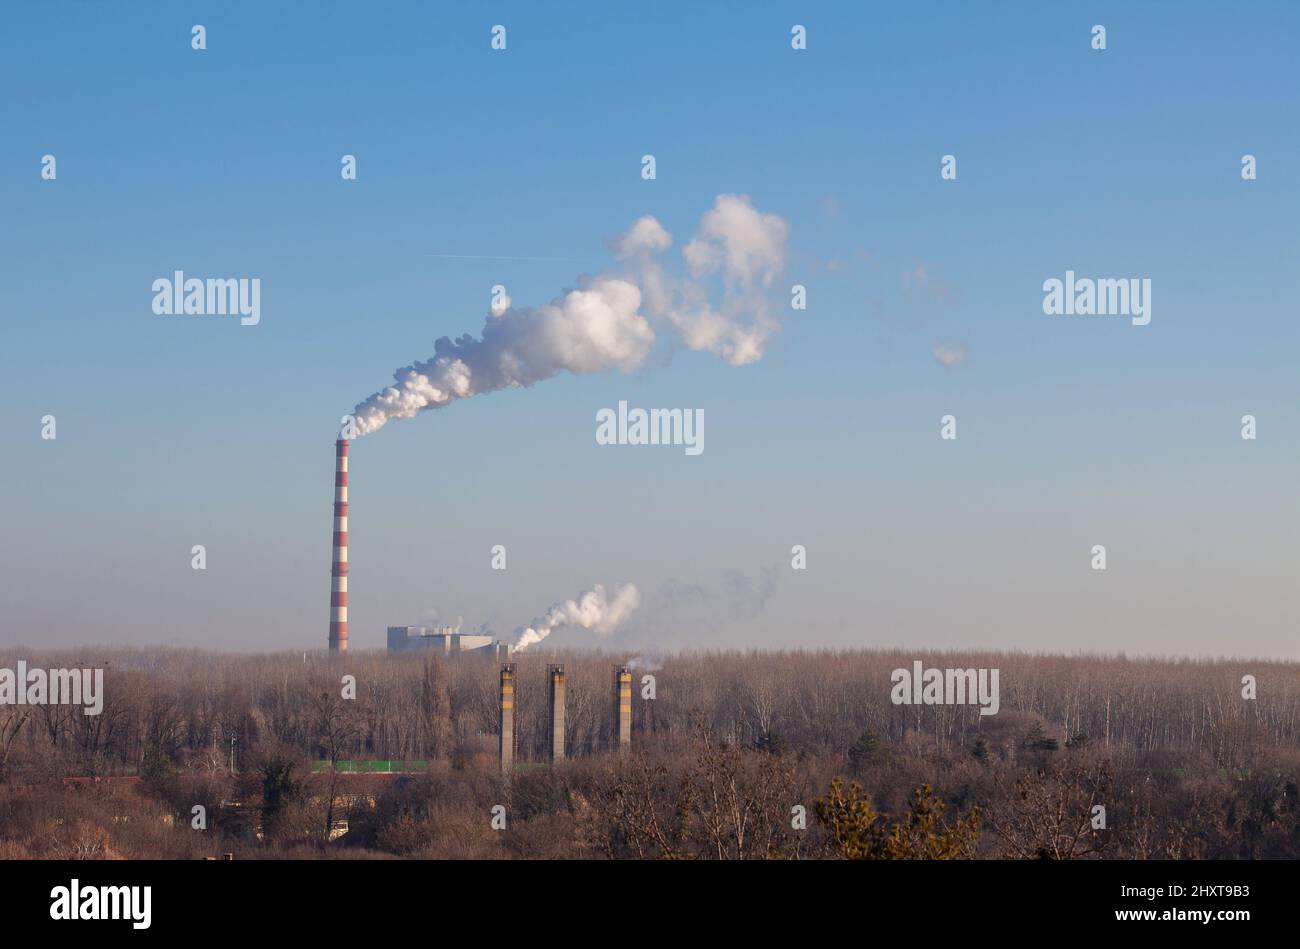 Smoke from a high smokestack against blue sky.  Chimney smoke from factory or a heating plants supplying heat to the city. Stock Photo